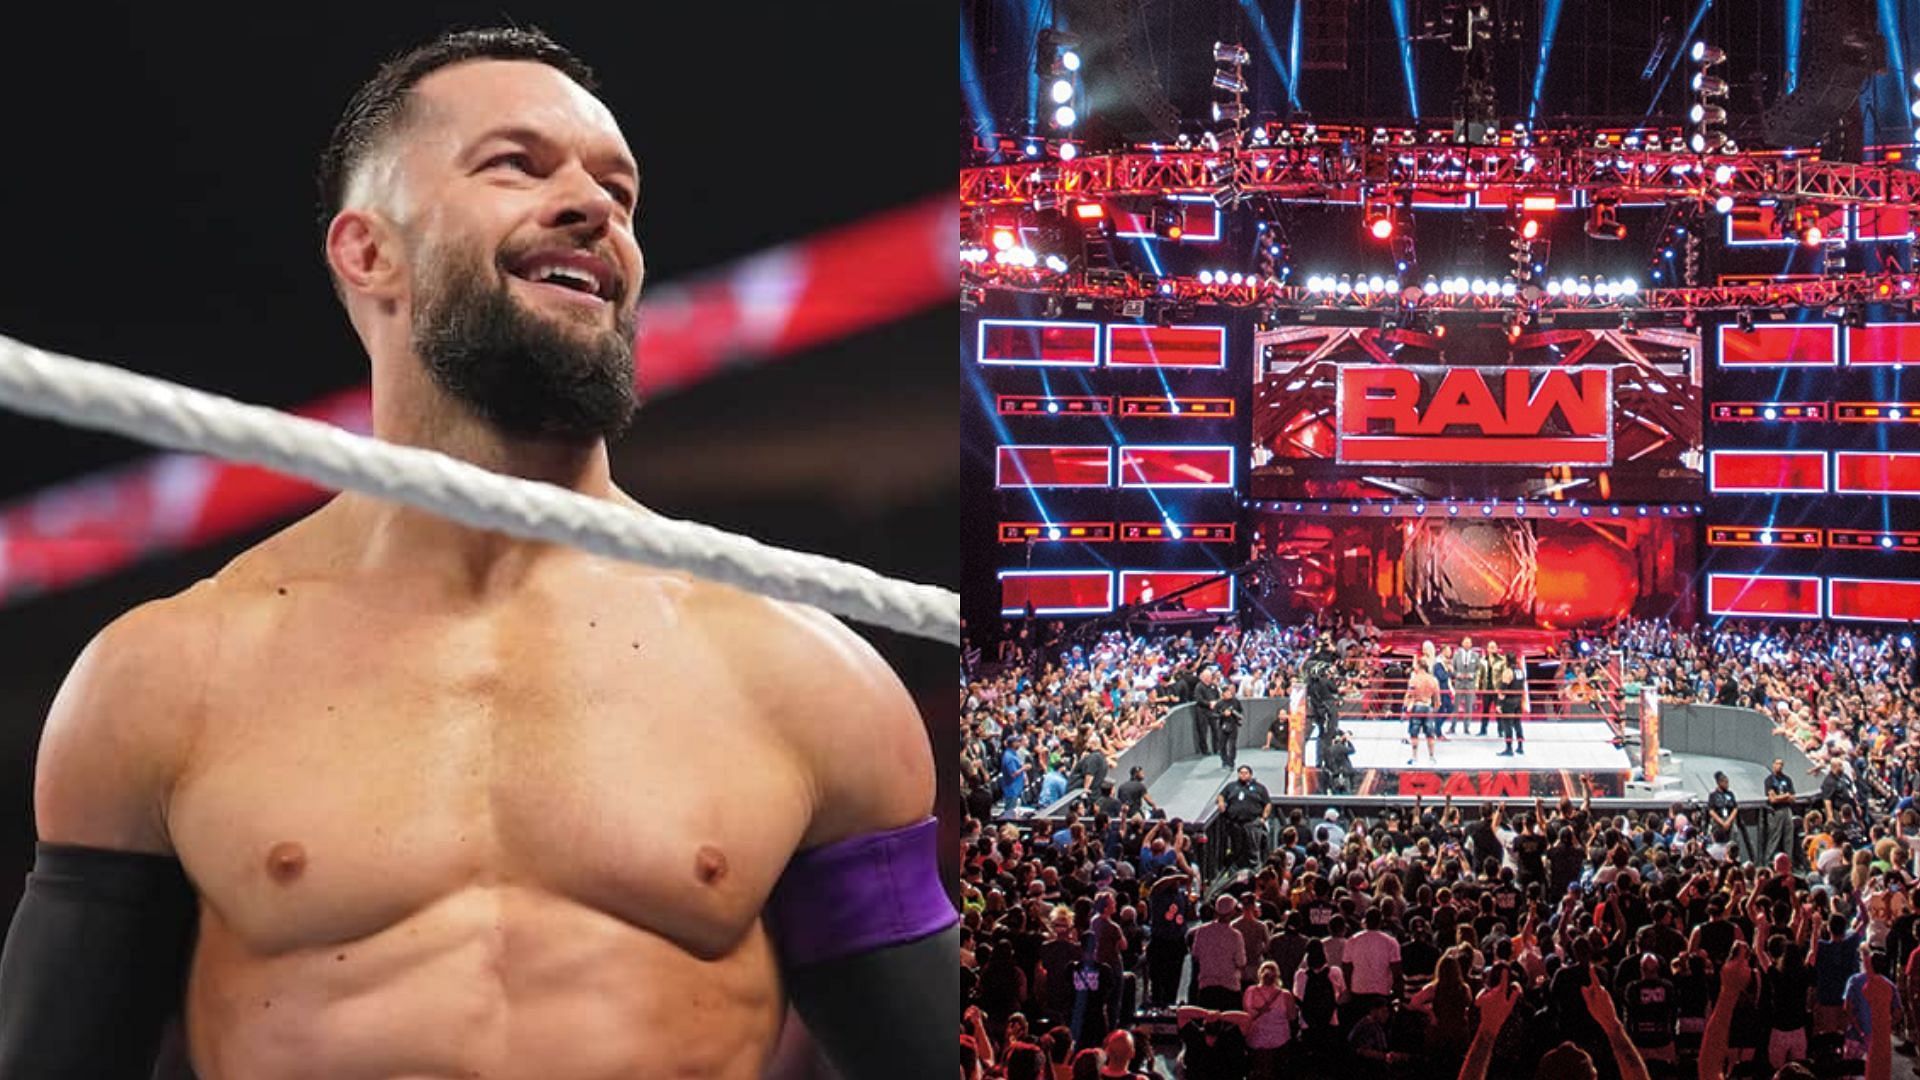 Finn Balor is set to face a former champion tonight on WWE RAW.